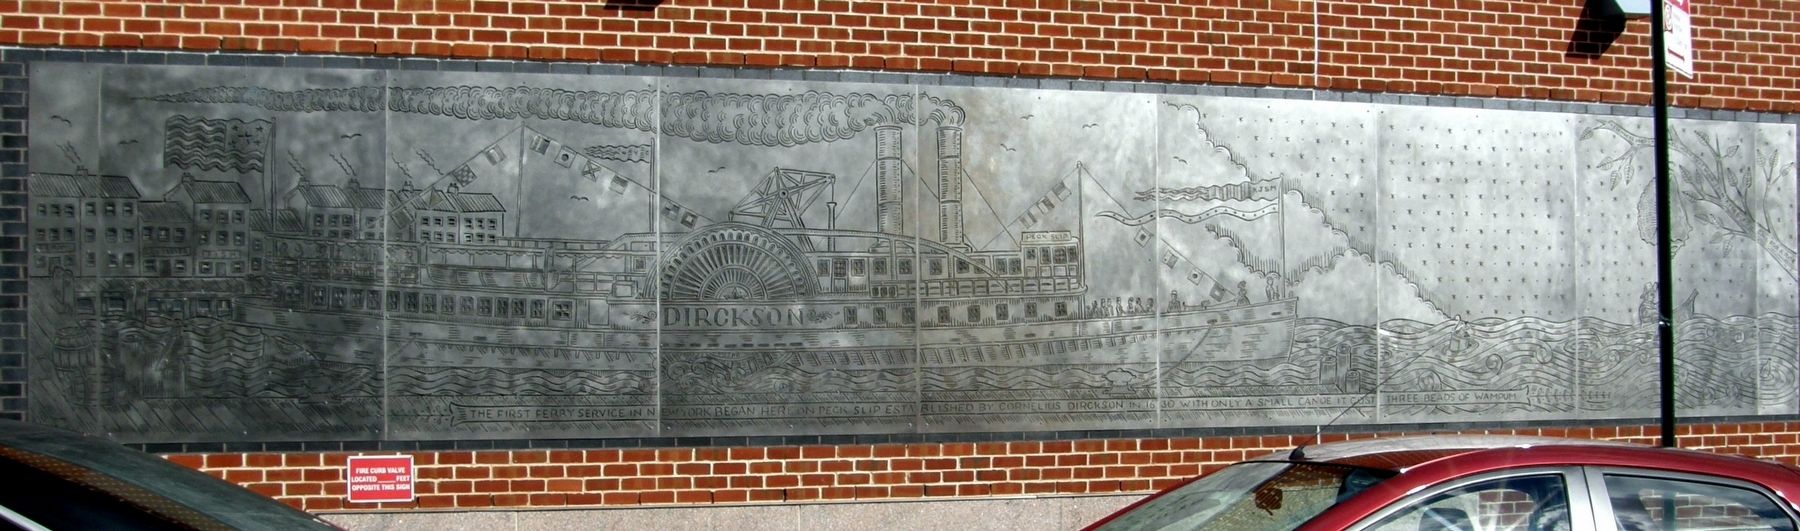 First ferry service in New York Marker image. Click for full size.